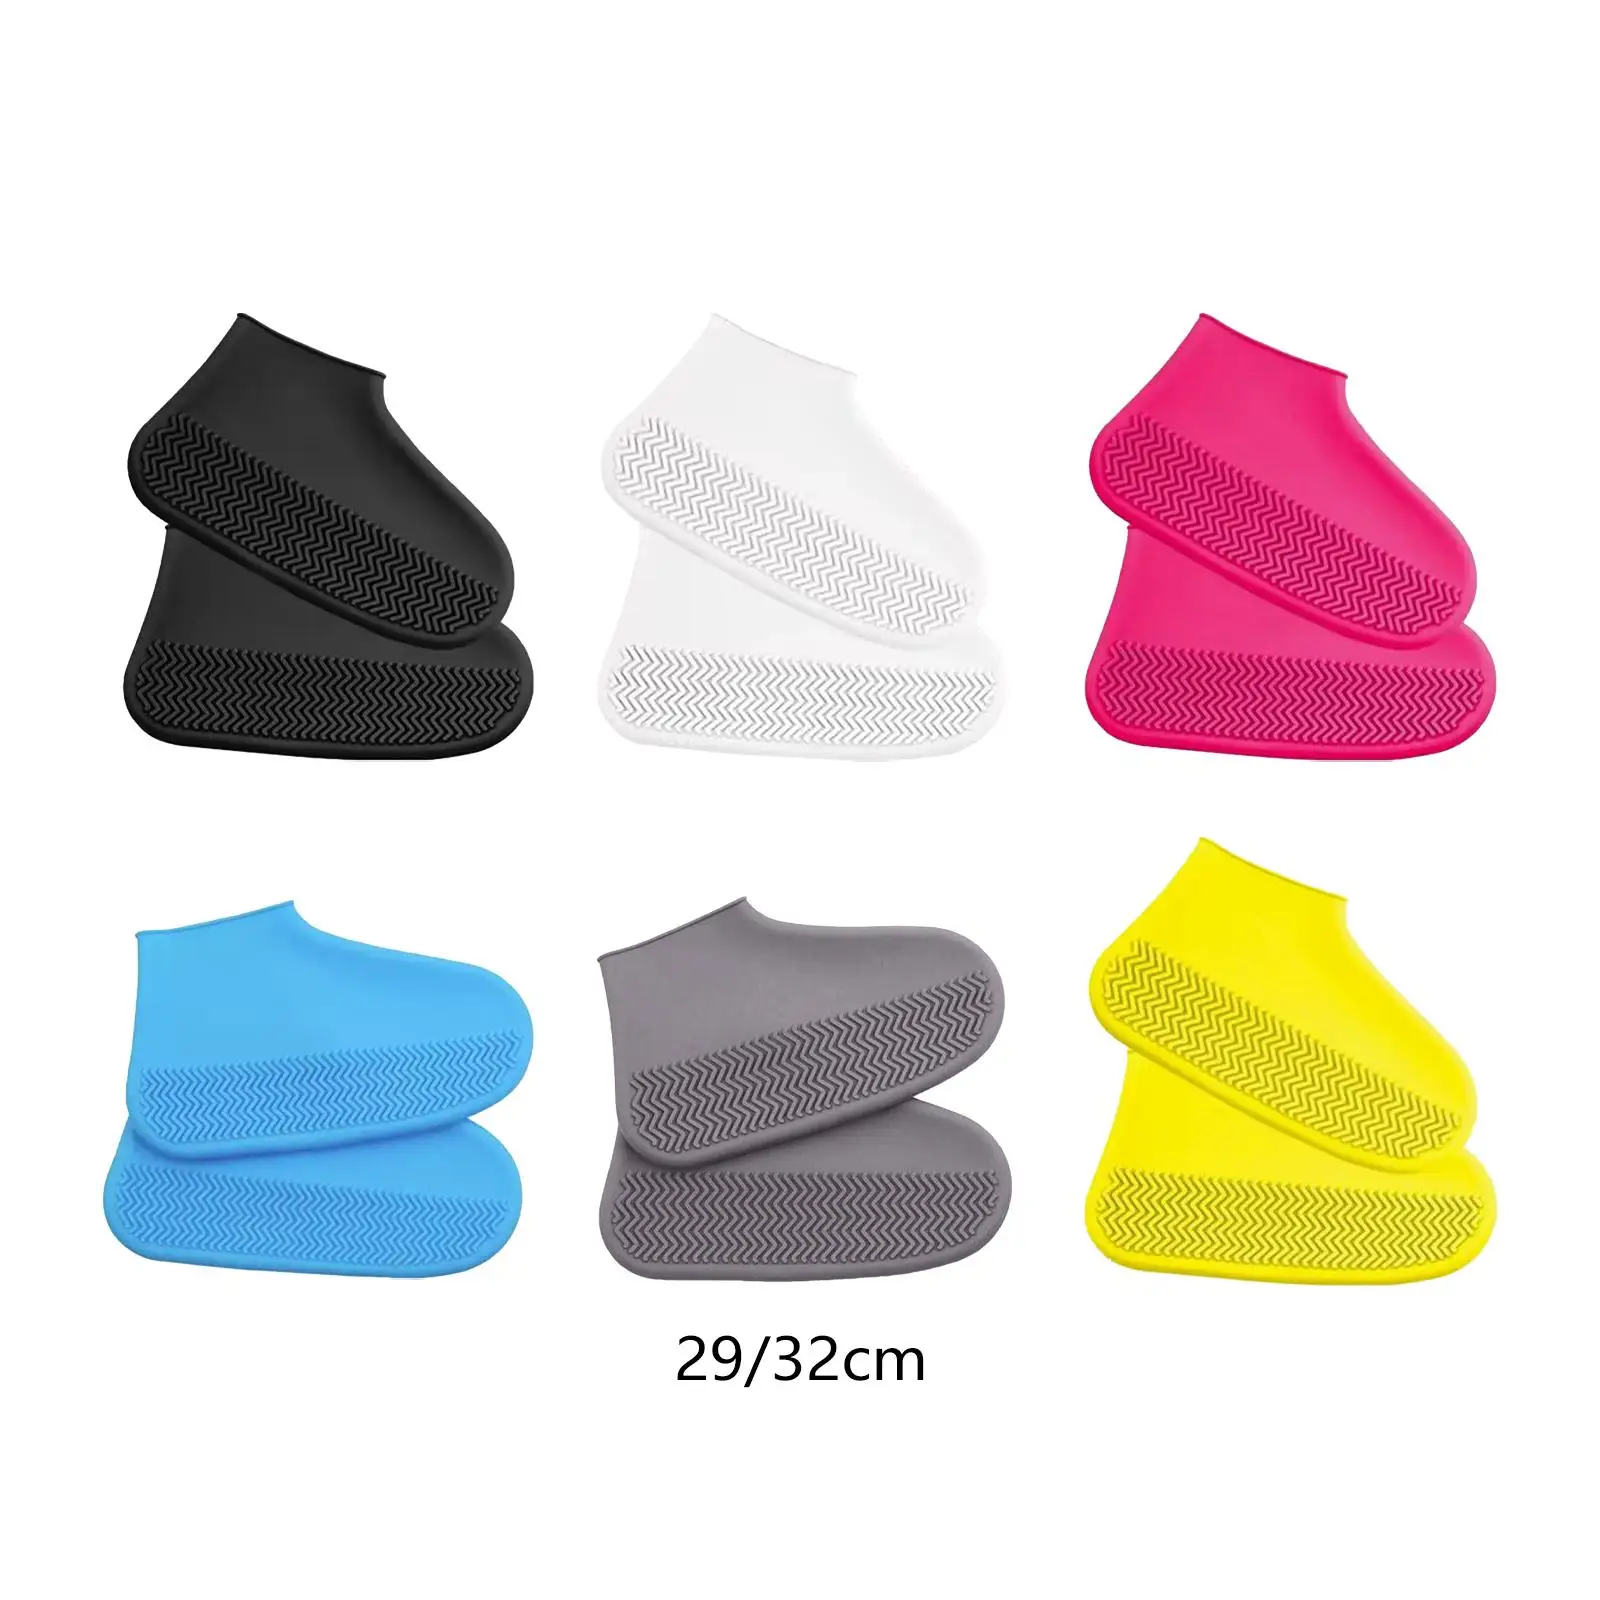 Waterproof Shoe Covers Shoe Covers for Rain for Traveling Hiking Cycling